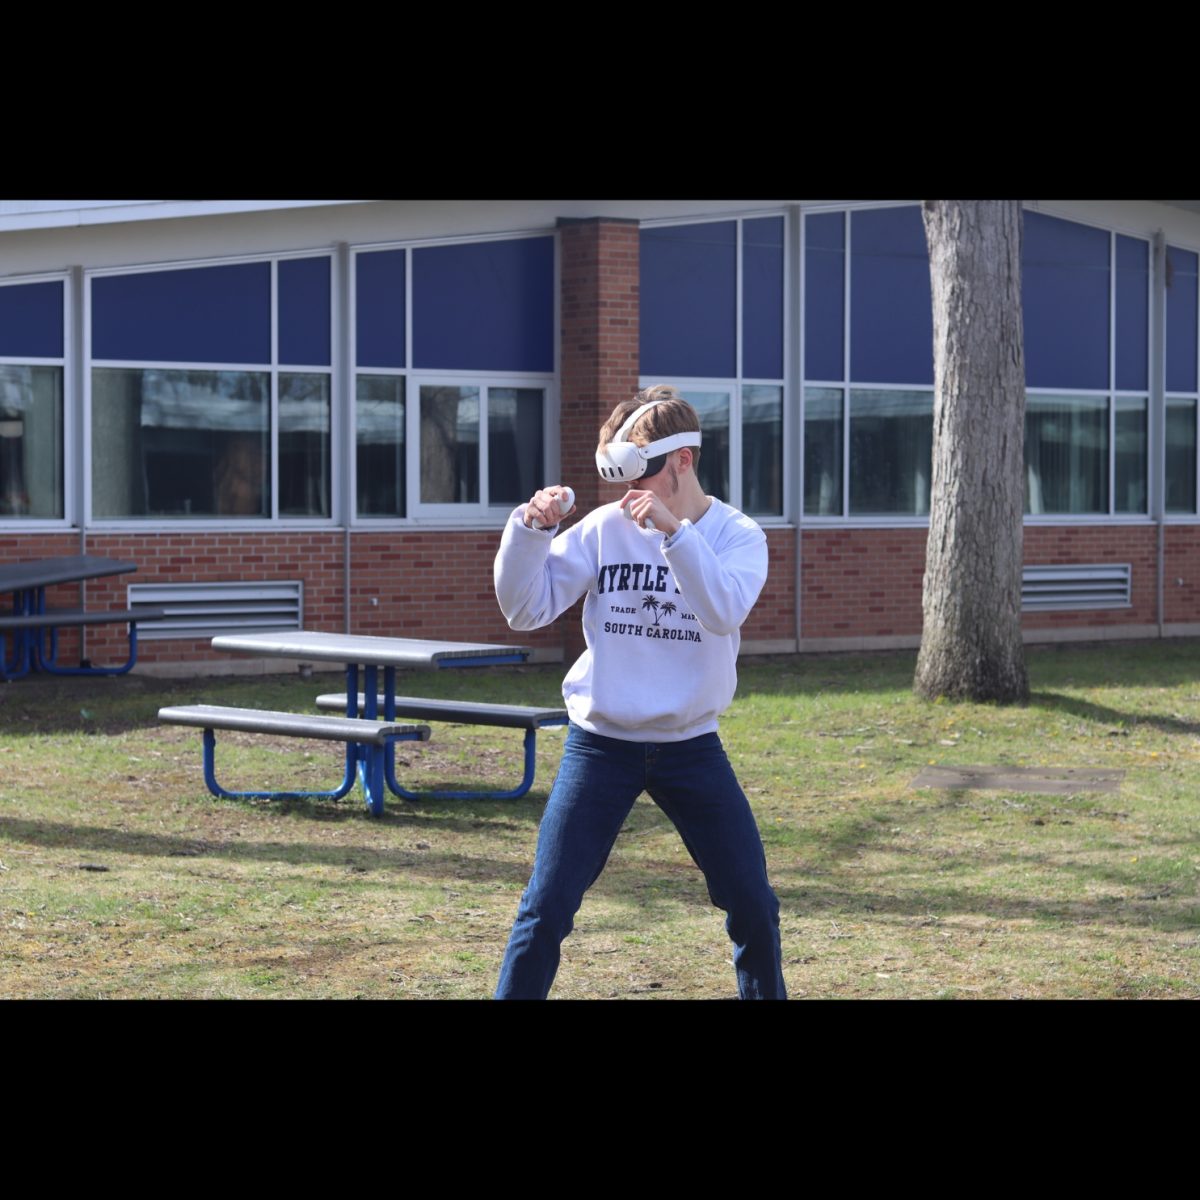 Photo of the Week #8: Squaring up with technology